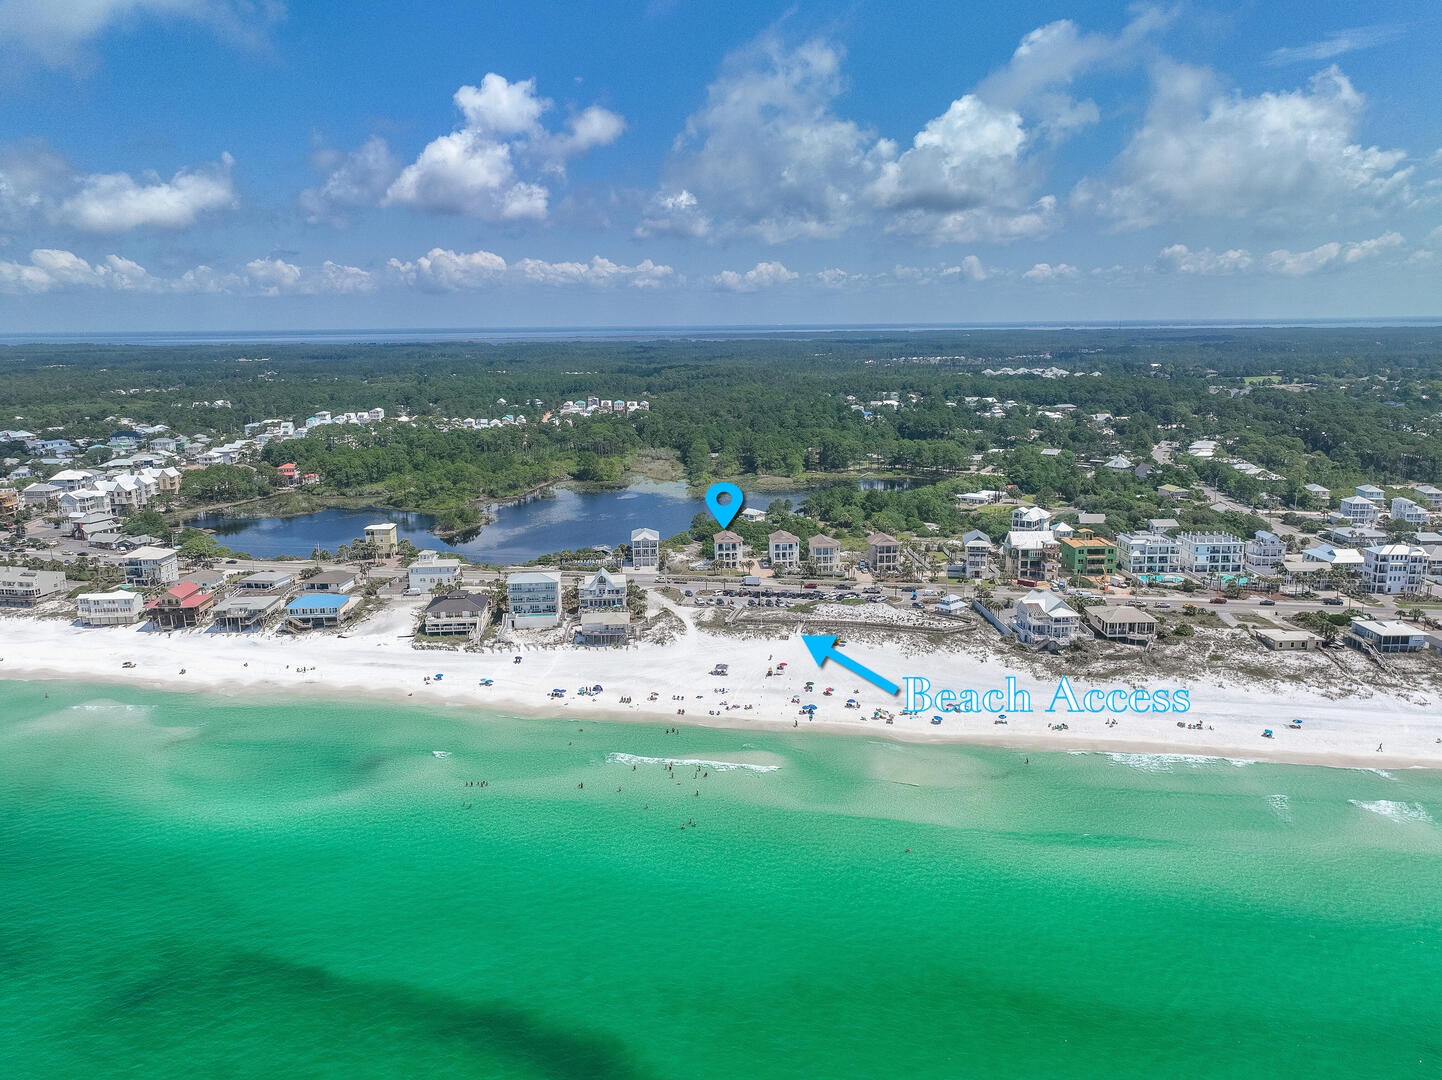 Beach access with restroom facilities directly across 30A!